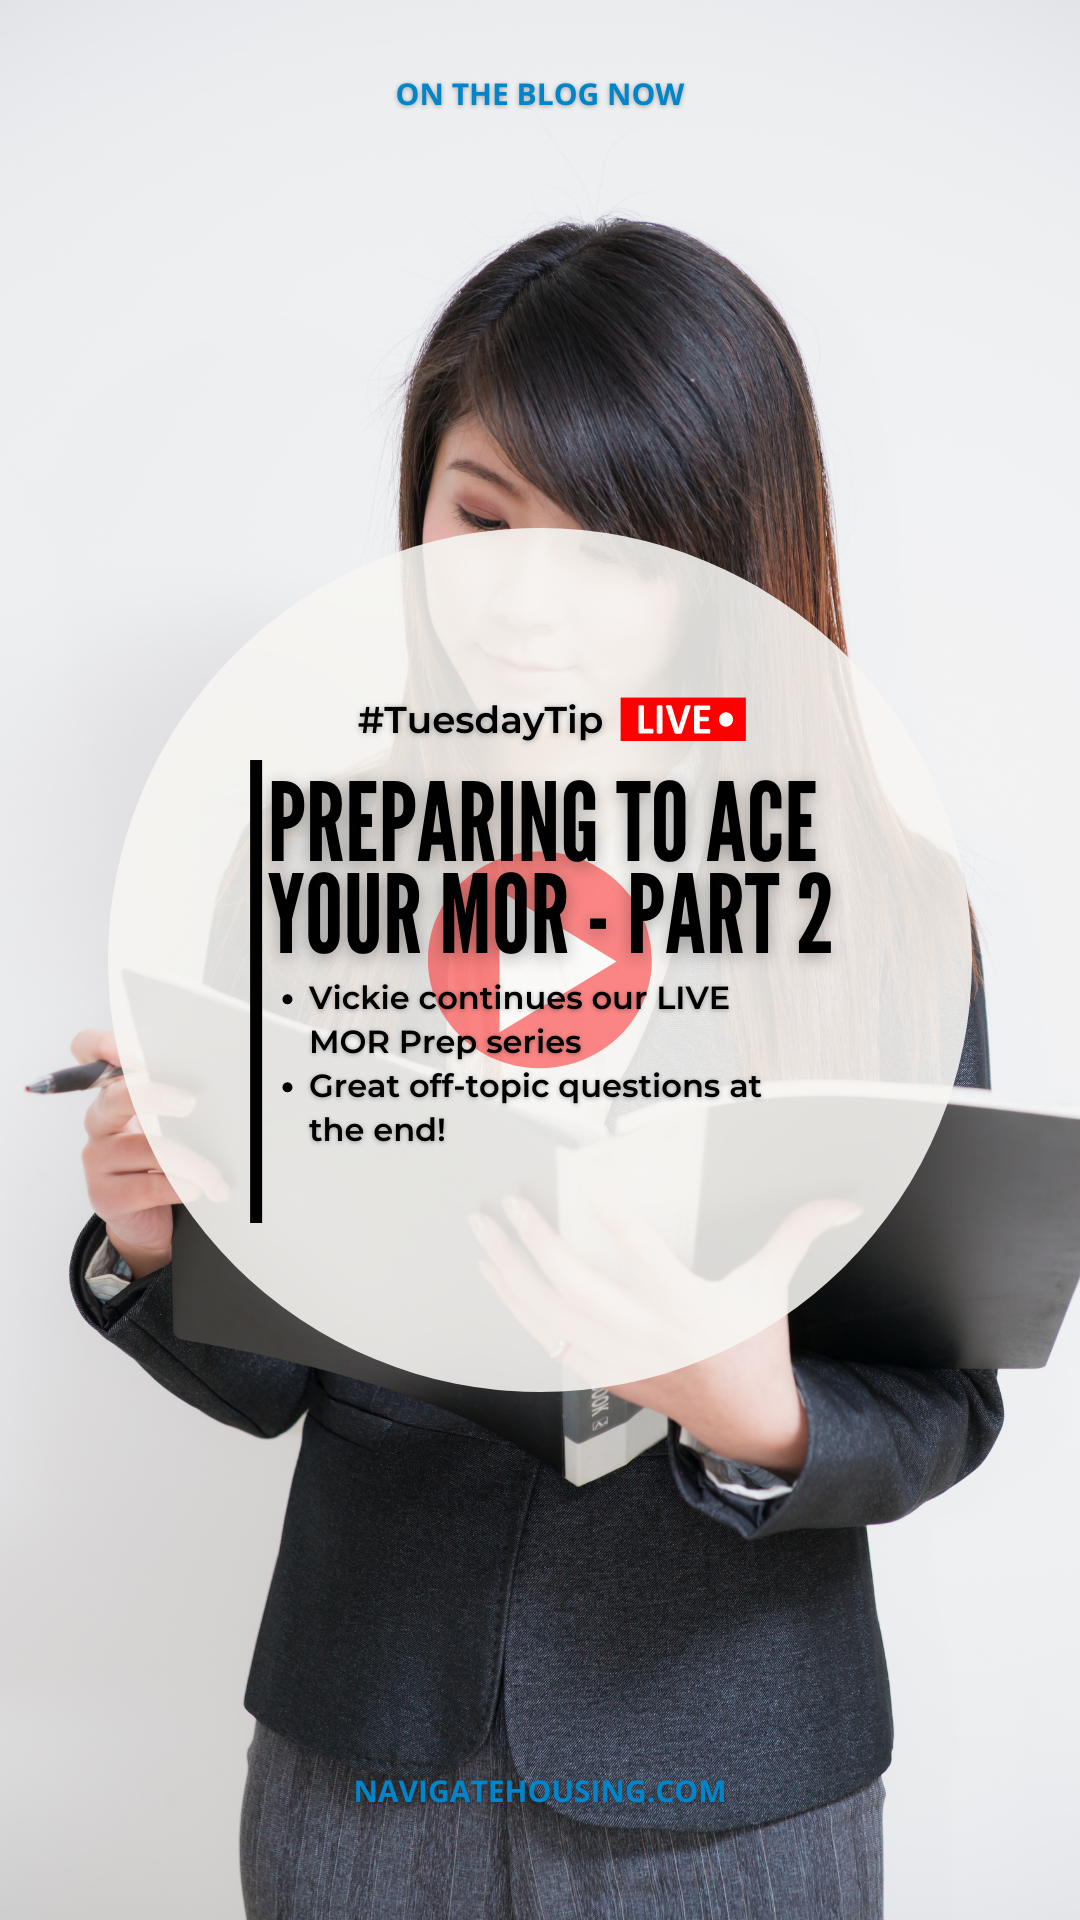 LIVE Tuesday Tip: Preparing to ACE your MOR, Part 2